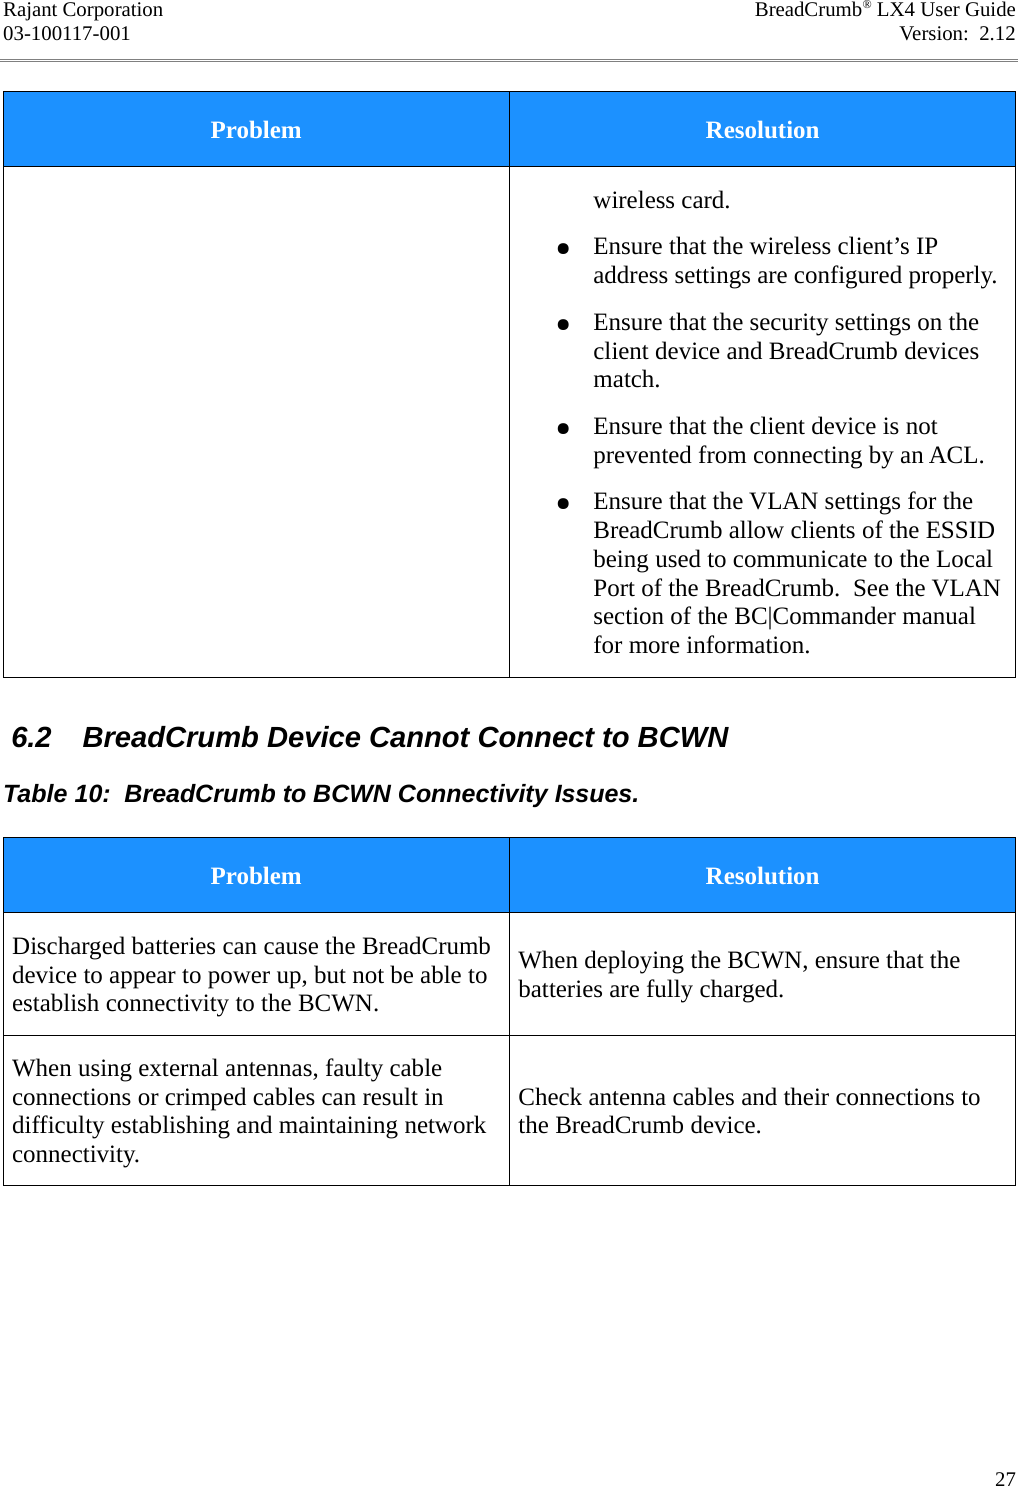 Rajant Corporation BreadCrumb® LX4 User Guide03-100117-001 Version:  2.12Problem Resolutionwireless card.●Ensure that the wireless client’s IP address settings are configured properly.●Ensure that the security settings on the client device and BreadCrumb devices match.●Ensure that the client device is not prevented from connecting by an ACL.●Ensure that the VLAN settings for the BreadCrumb allow clients of the ESSID being used to communicate to the Local Port of the BreadCrumb.  See the VLAN section of the BC|Commander manual for more information. 6.2  BreadCrumb Device Cannot Connect to BCWNTable 10:  BreadCrumb to BCWN Connectivity Issues.Problem ResolutionDischarged batteries can cause the BreadCrumb device to appear to power up, but not be able to establish connectivity to the BCWN.When deploying the BCWN, ensure that the batteries are fully charged.When using external antennas, faulty cable connections or crimped cables can result in difficulty establishing and maintaining network connectivity.Check antenna cables and their connections to the BreadCrumb device.27